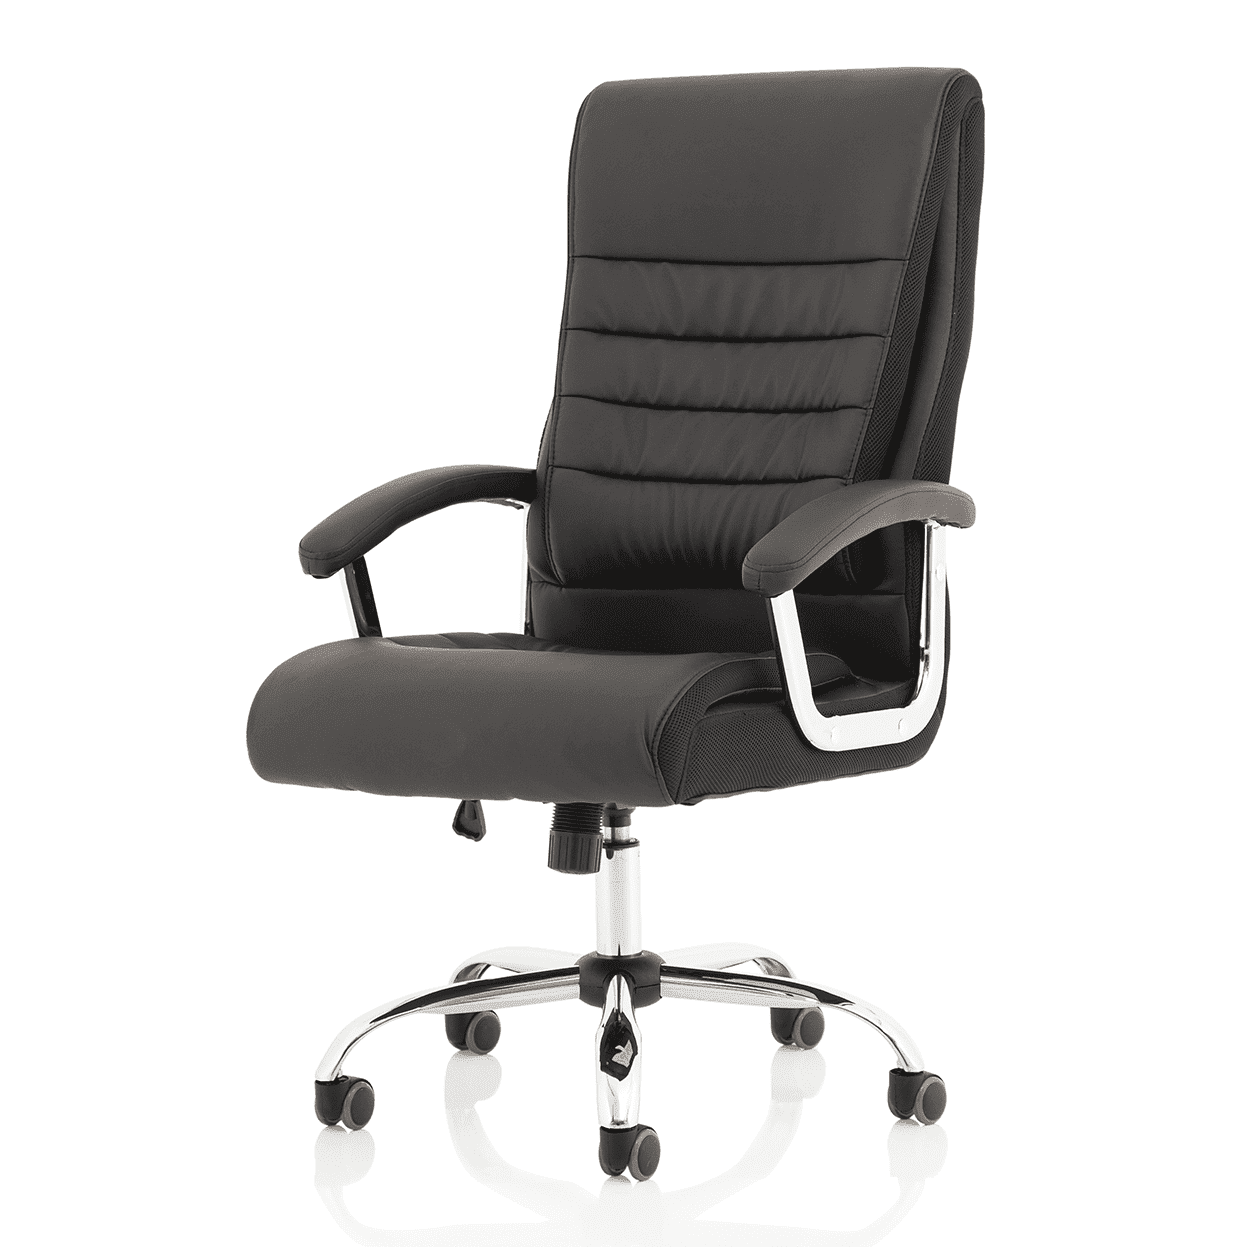 Dallas High Back Executive Office Chair - Black Leather, Chrome Metal Frame, Fixed Arms, 120kg Capacity, 8hr Usage, 1yr Warranty (640x780x1110-1190mm)